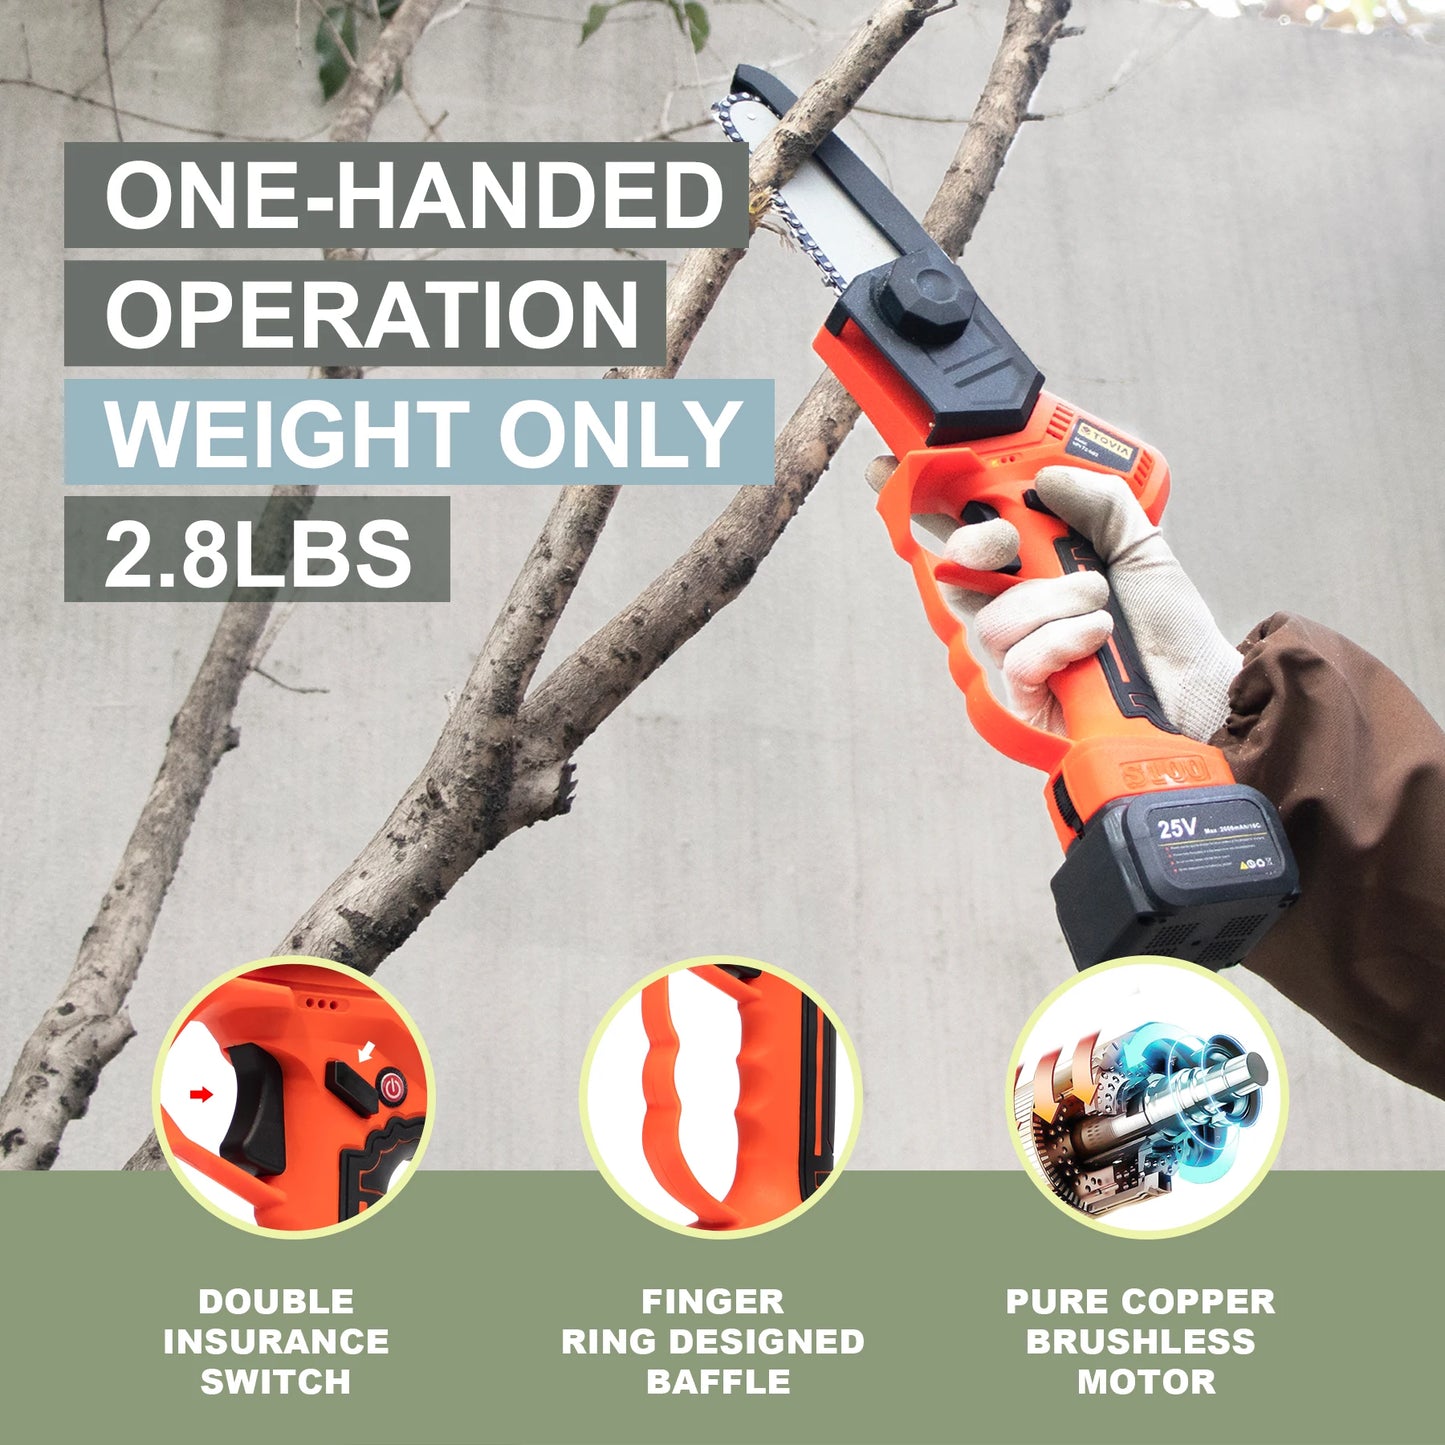 Cordless Electric Pruner 40mm 25V Pruning Shears With 5 Inch Electric Chain Saw Garden Tool Set - S & R Enterprises